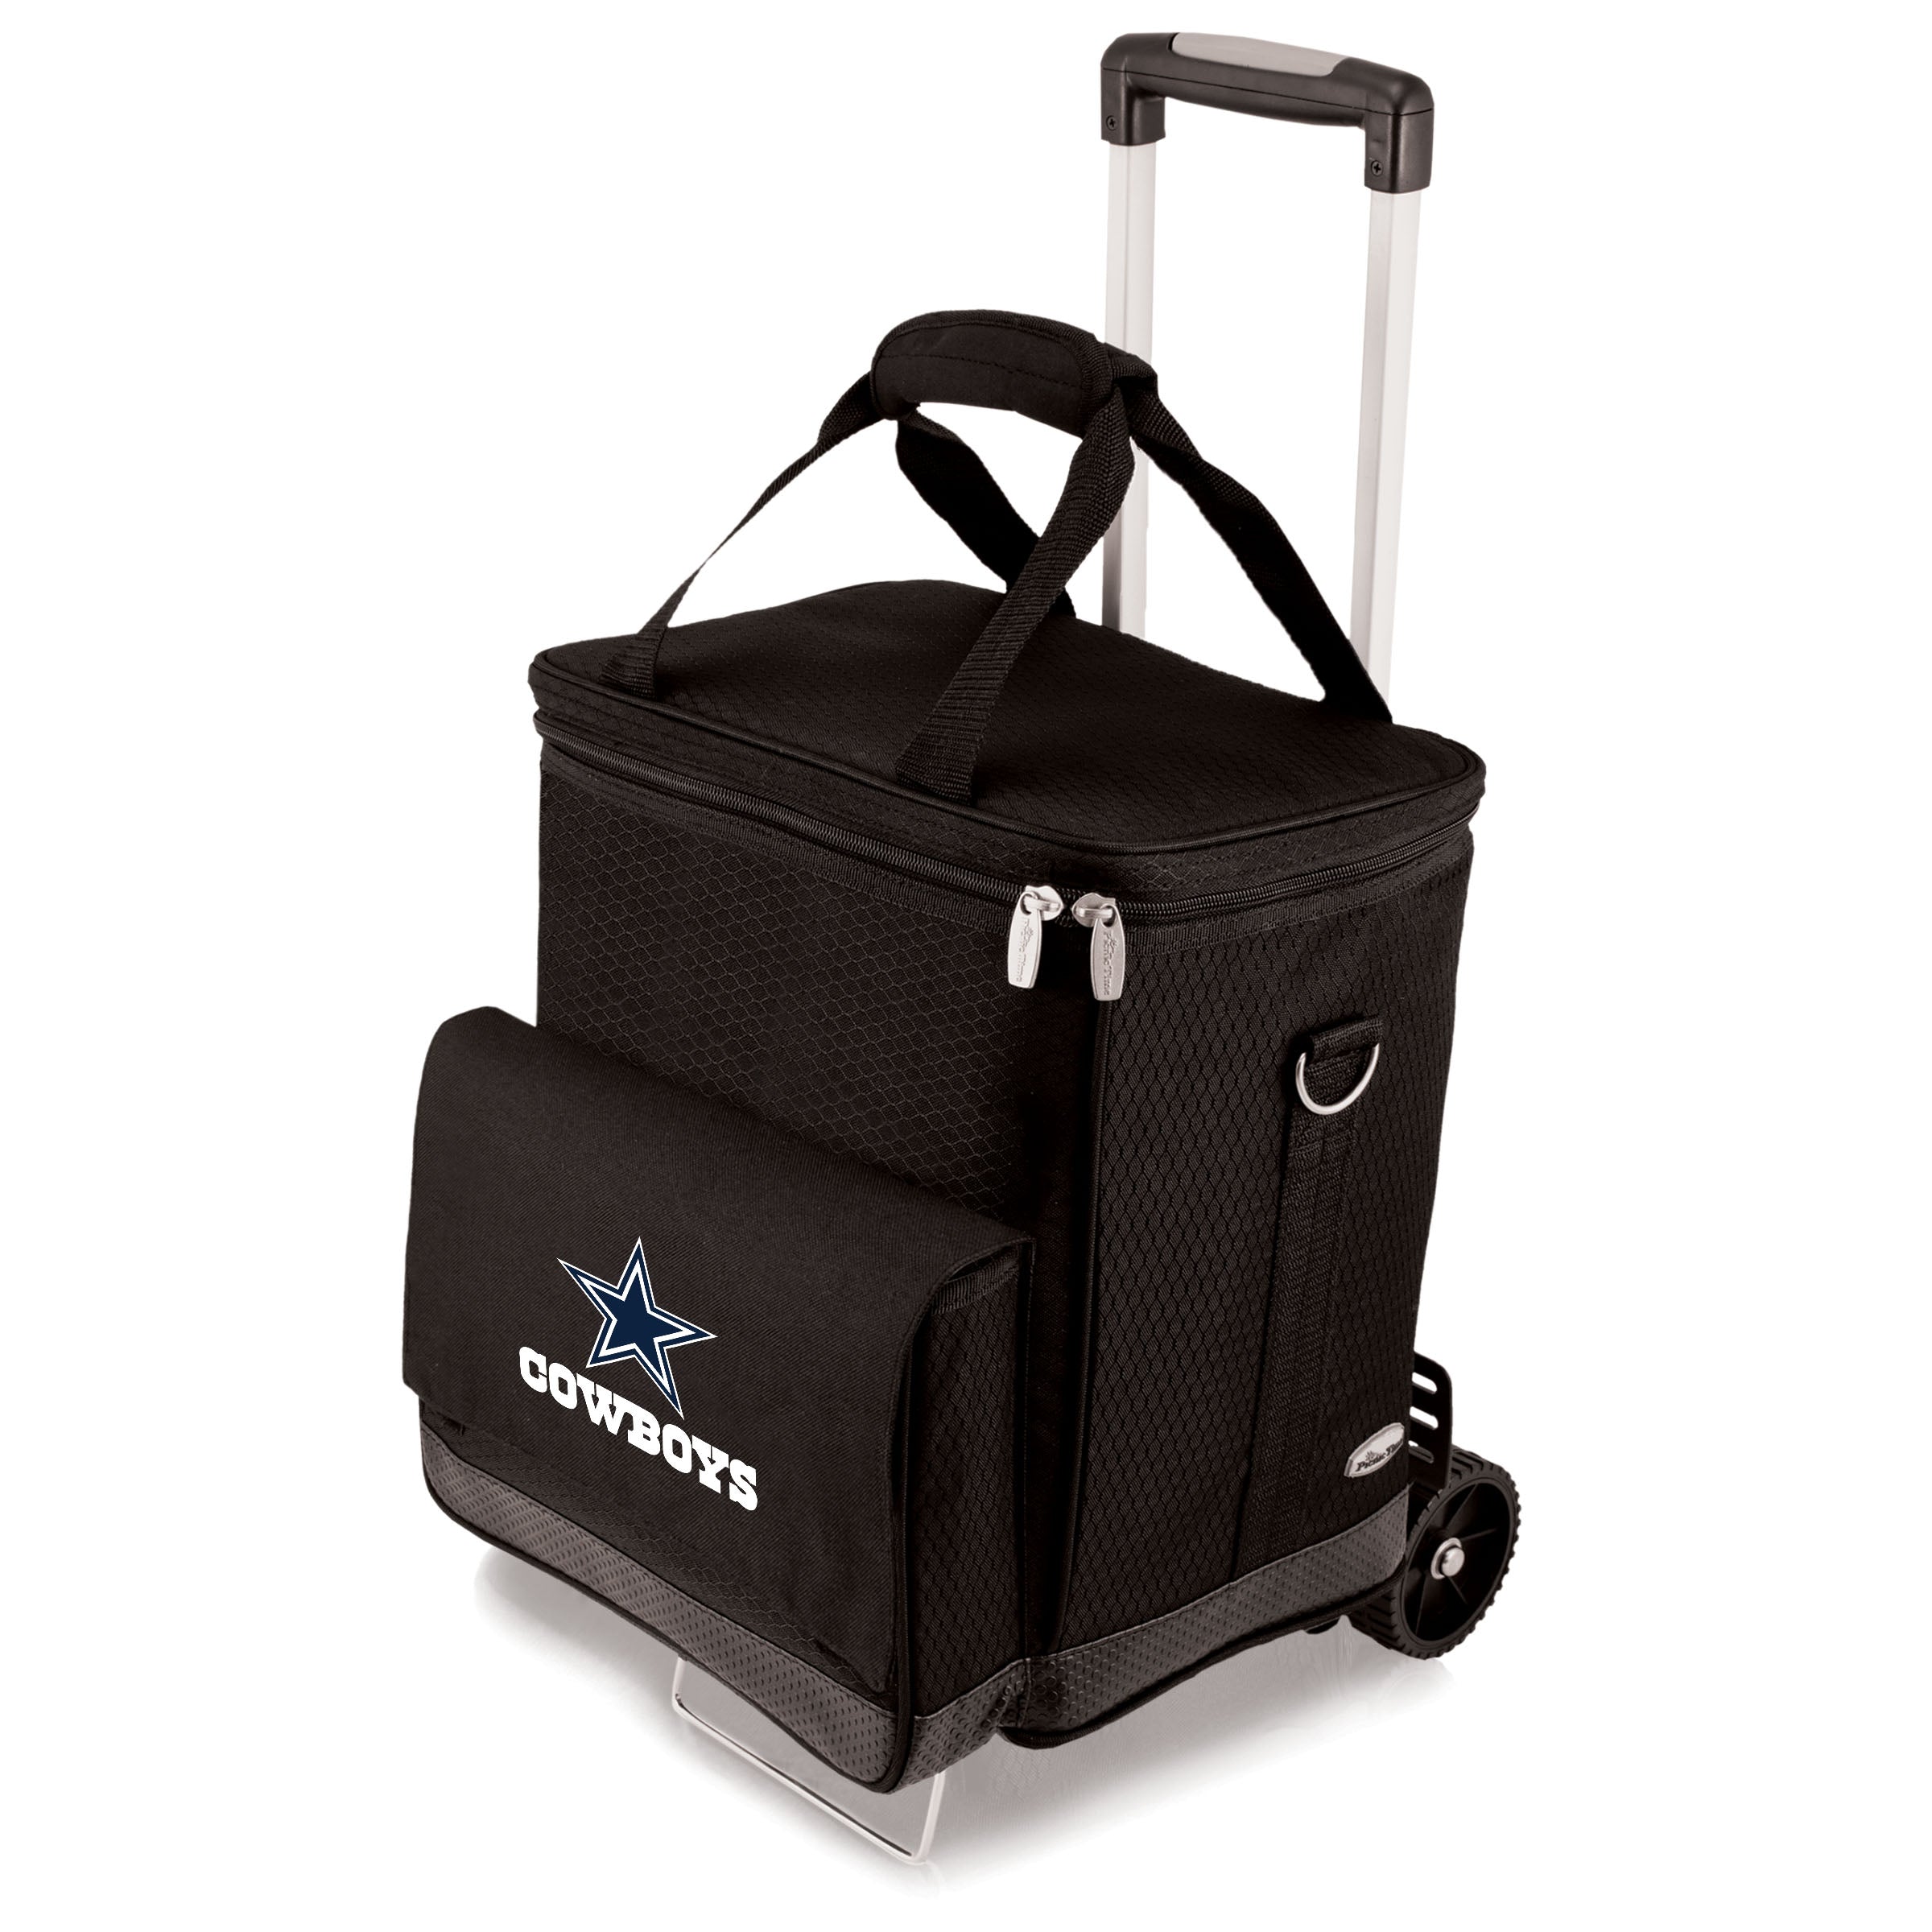 Dallas Cowboys - Cellar 6-Bottle Wine Carrier & Cooler Tote with Trolley